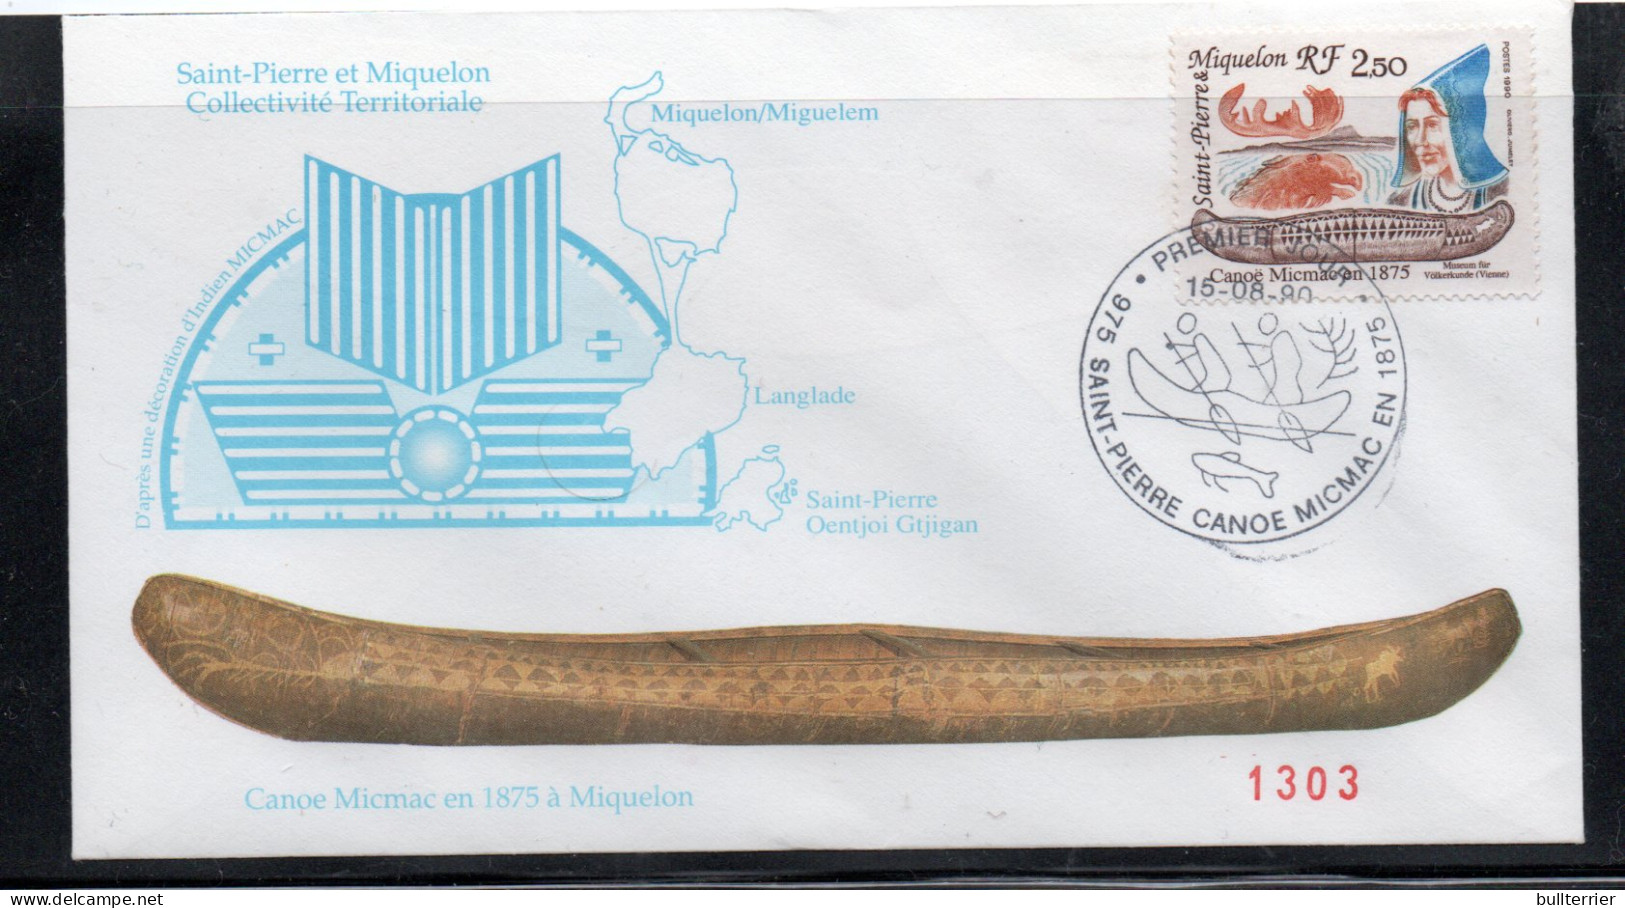 CANOES - ST PIERRE MIQUELON - 1980 - MICMAC CANOE ON ILLUSTRATED FDC - Canoë